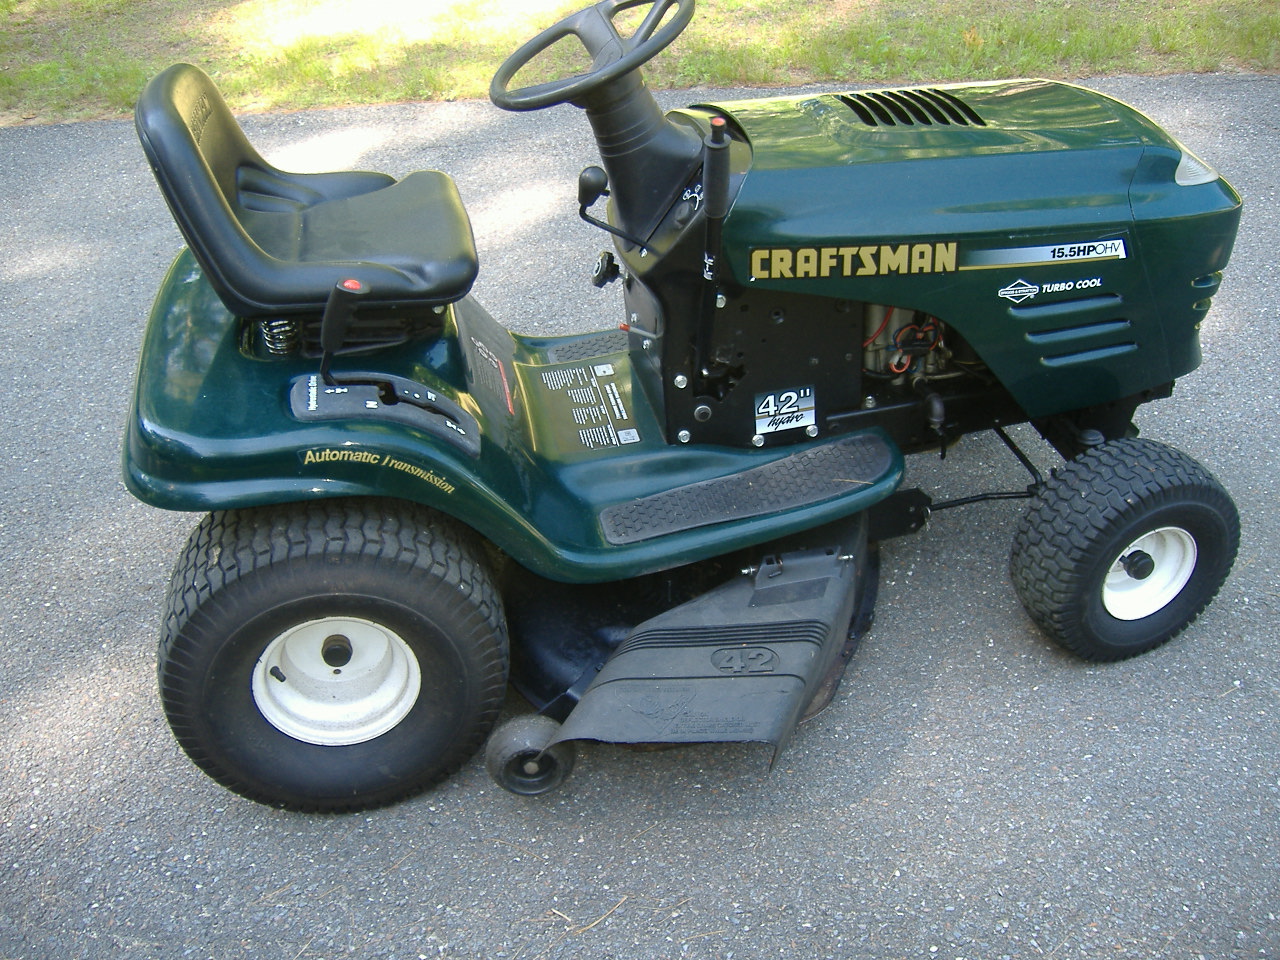 Craftsman Lawn Tractor serviced | Townsend Road Power